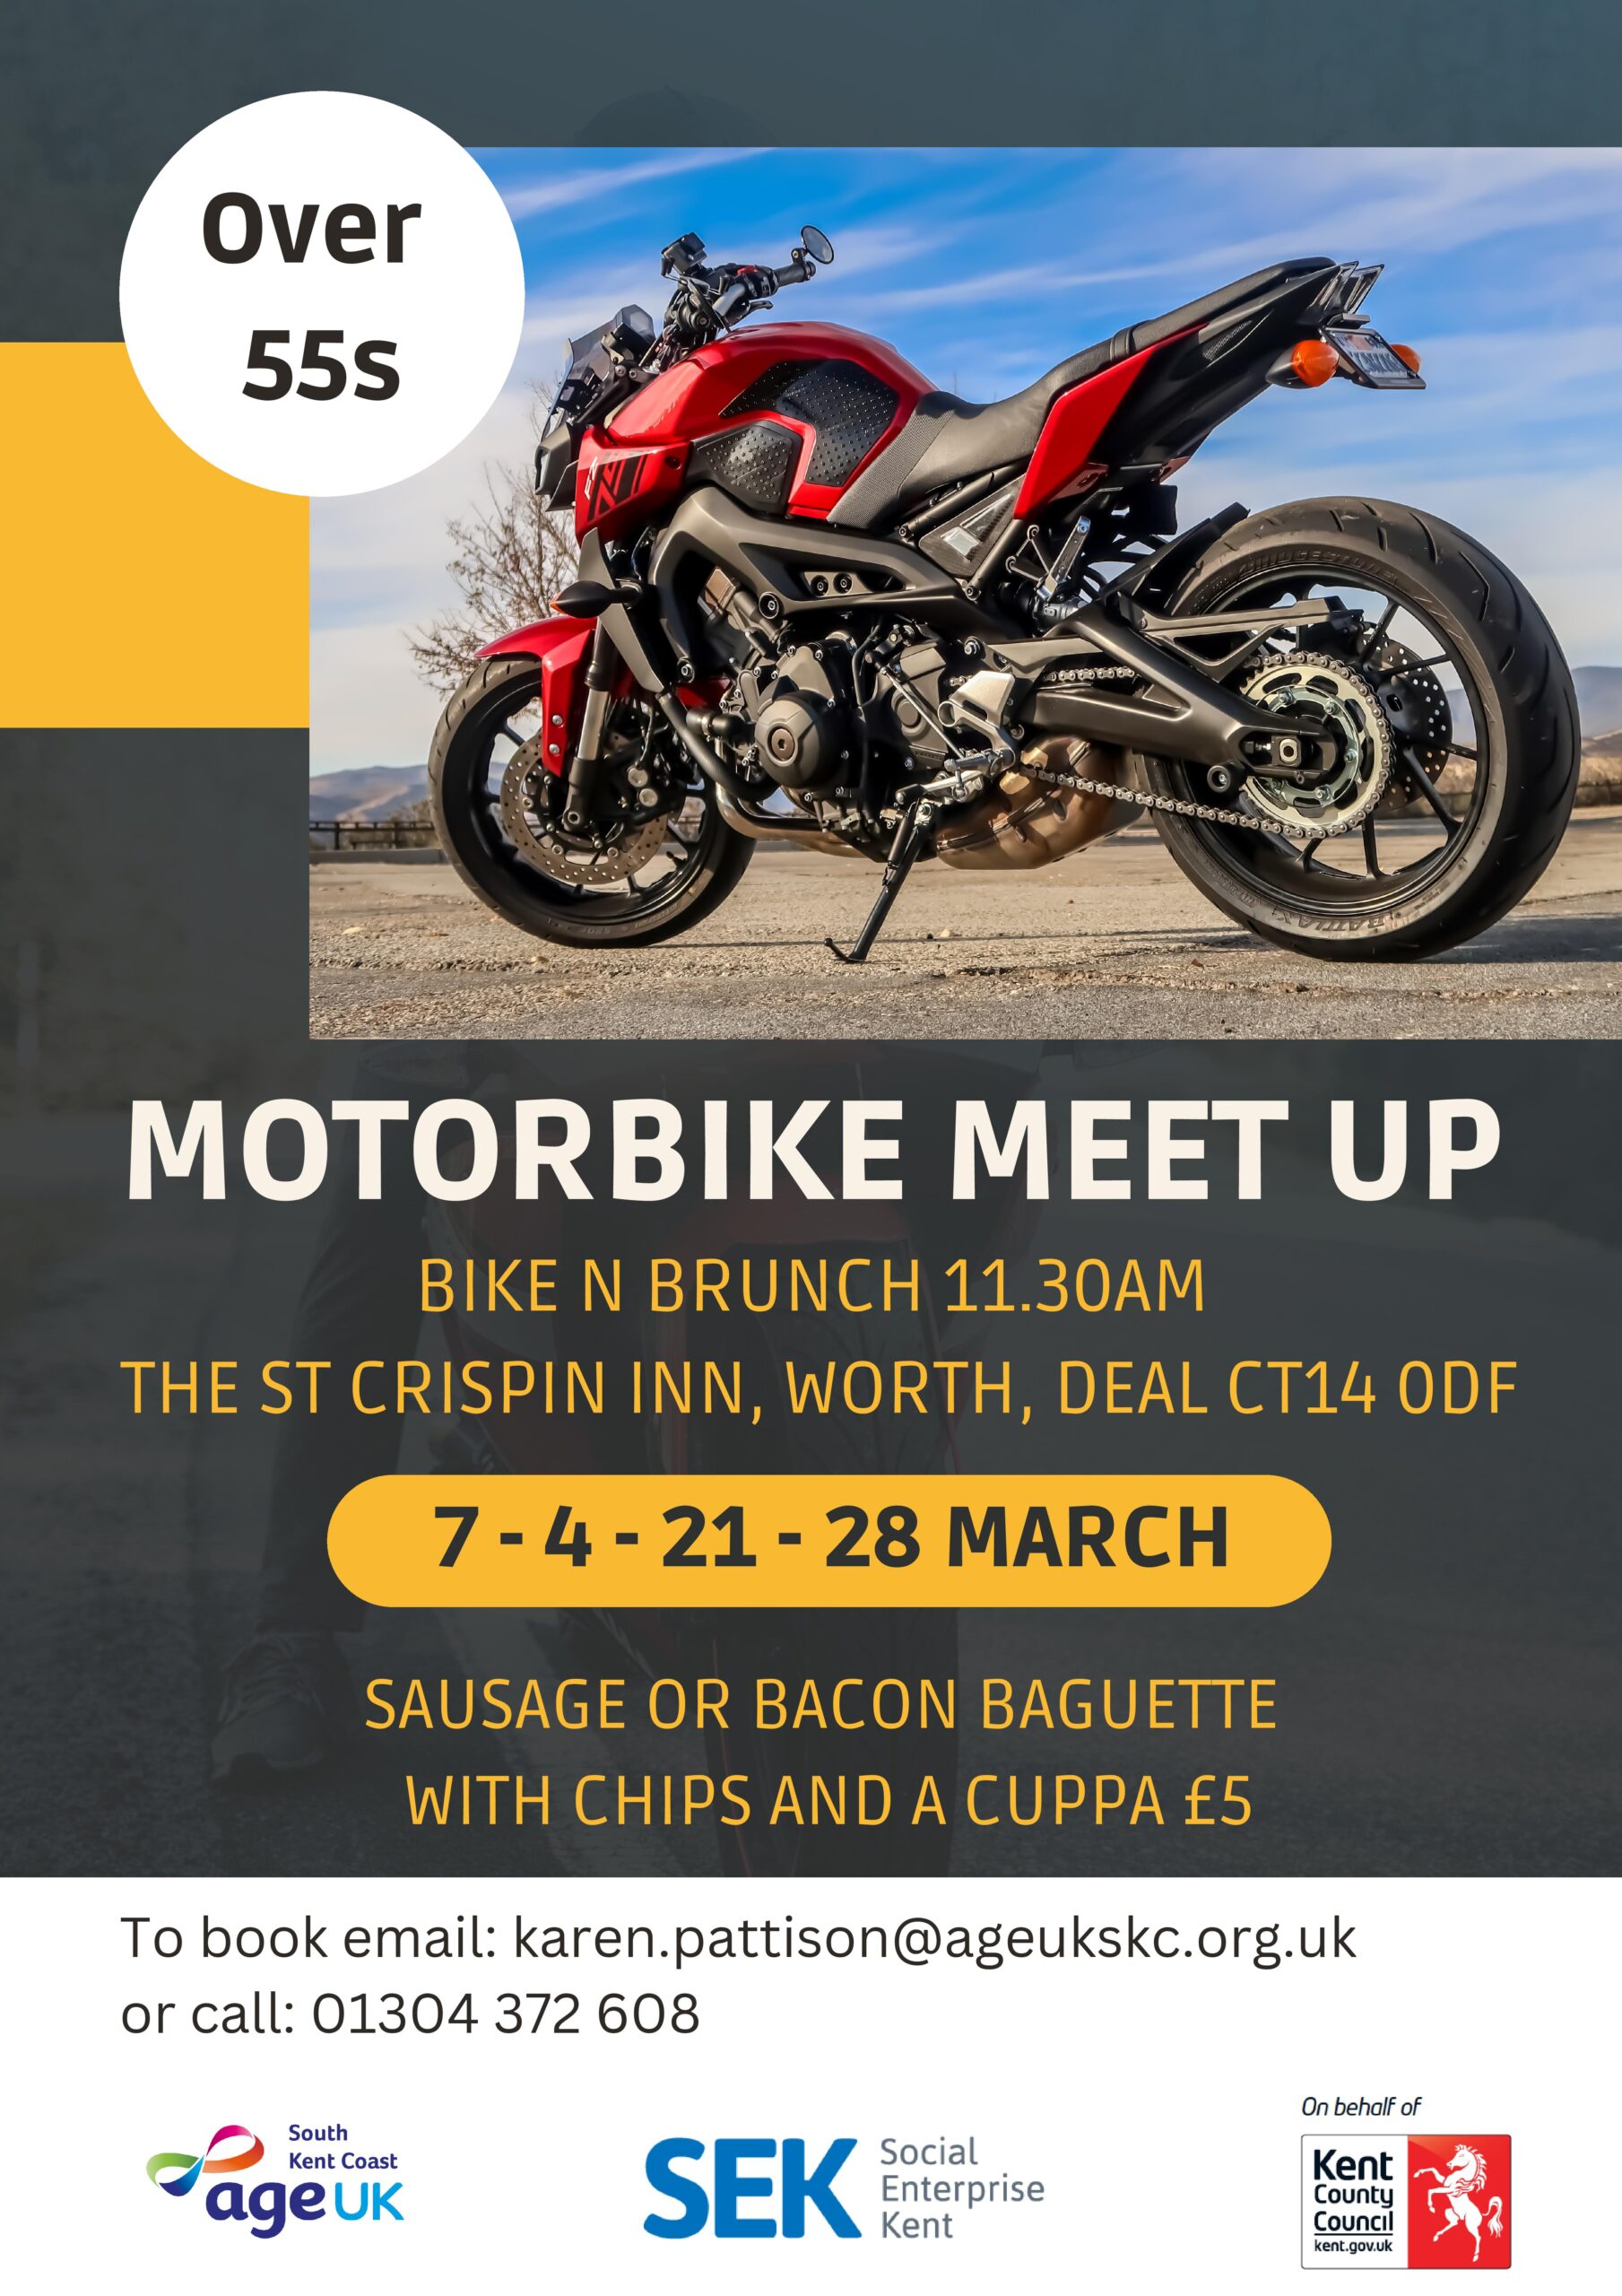 Motorbike meet up poster, explaining where, Deal Kent, every Tuesday in March 11:30am